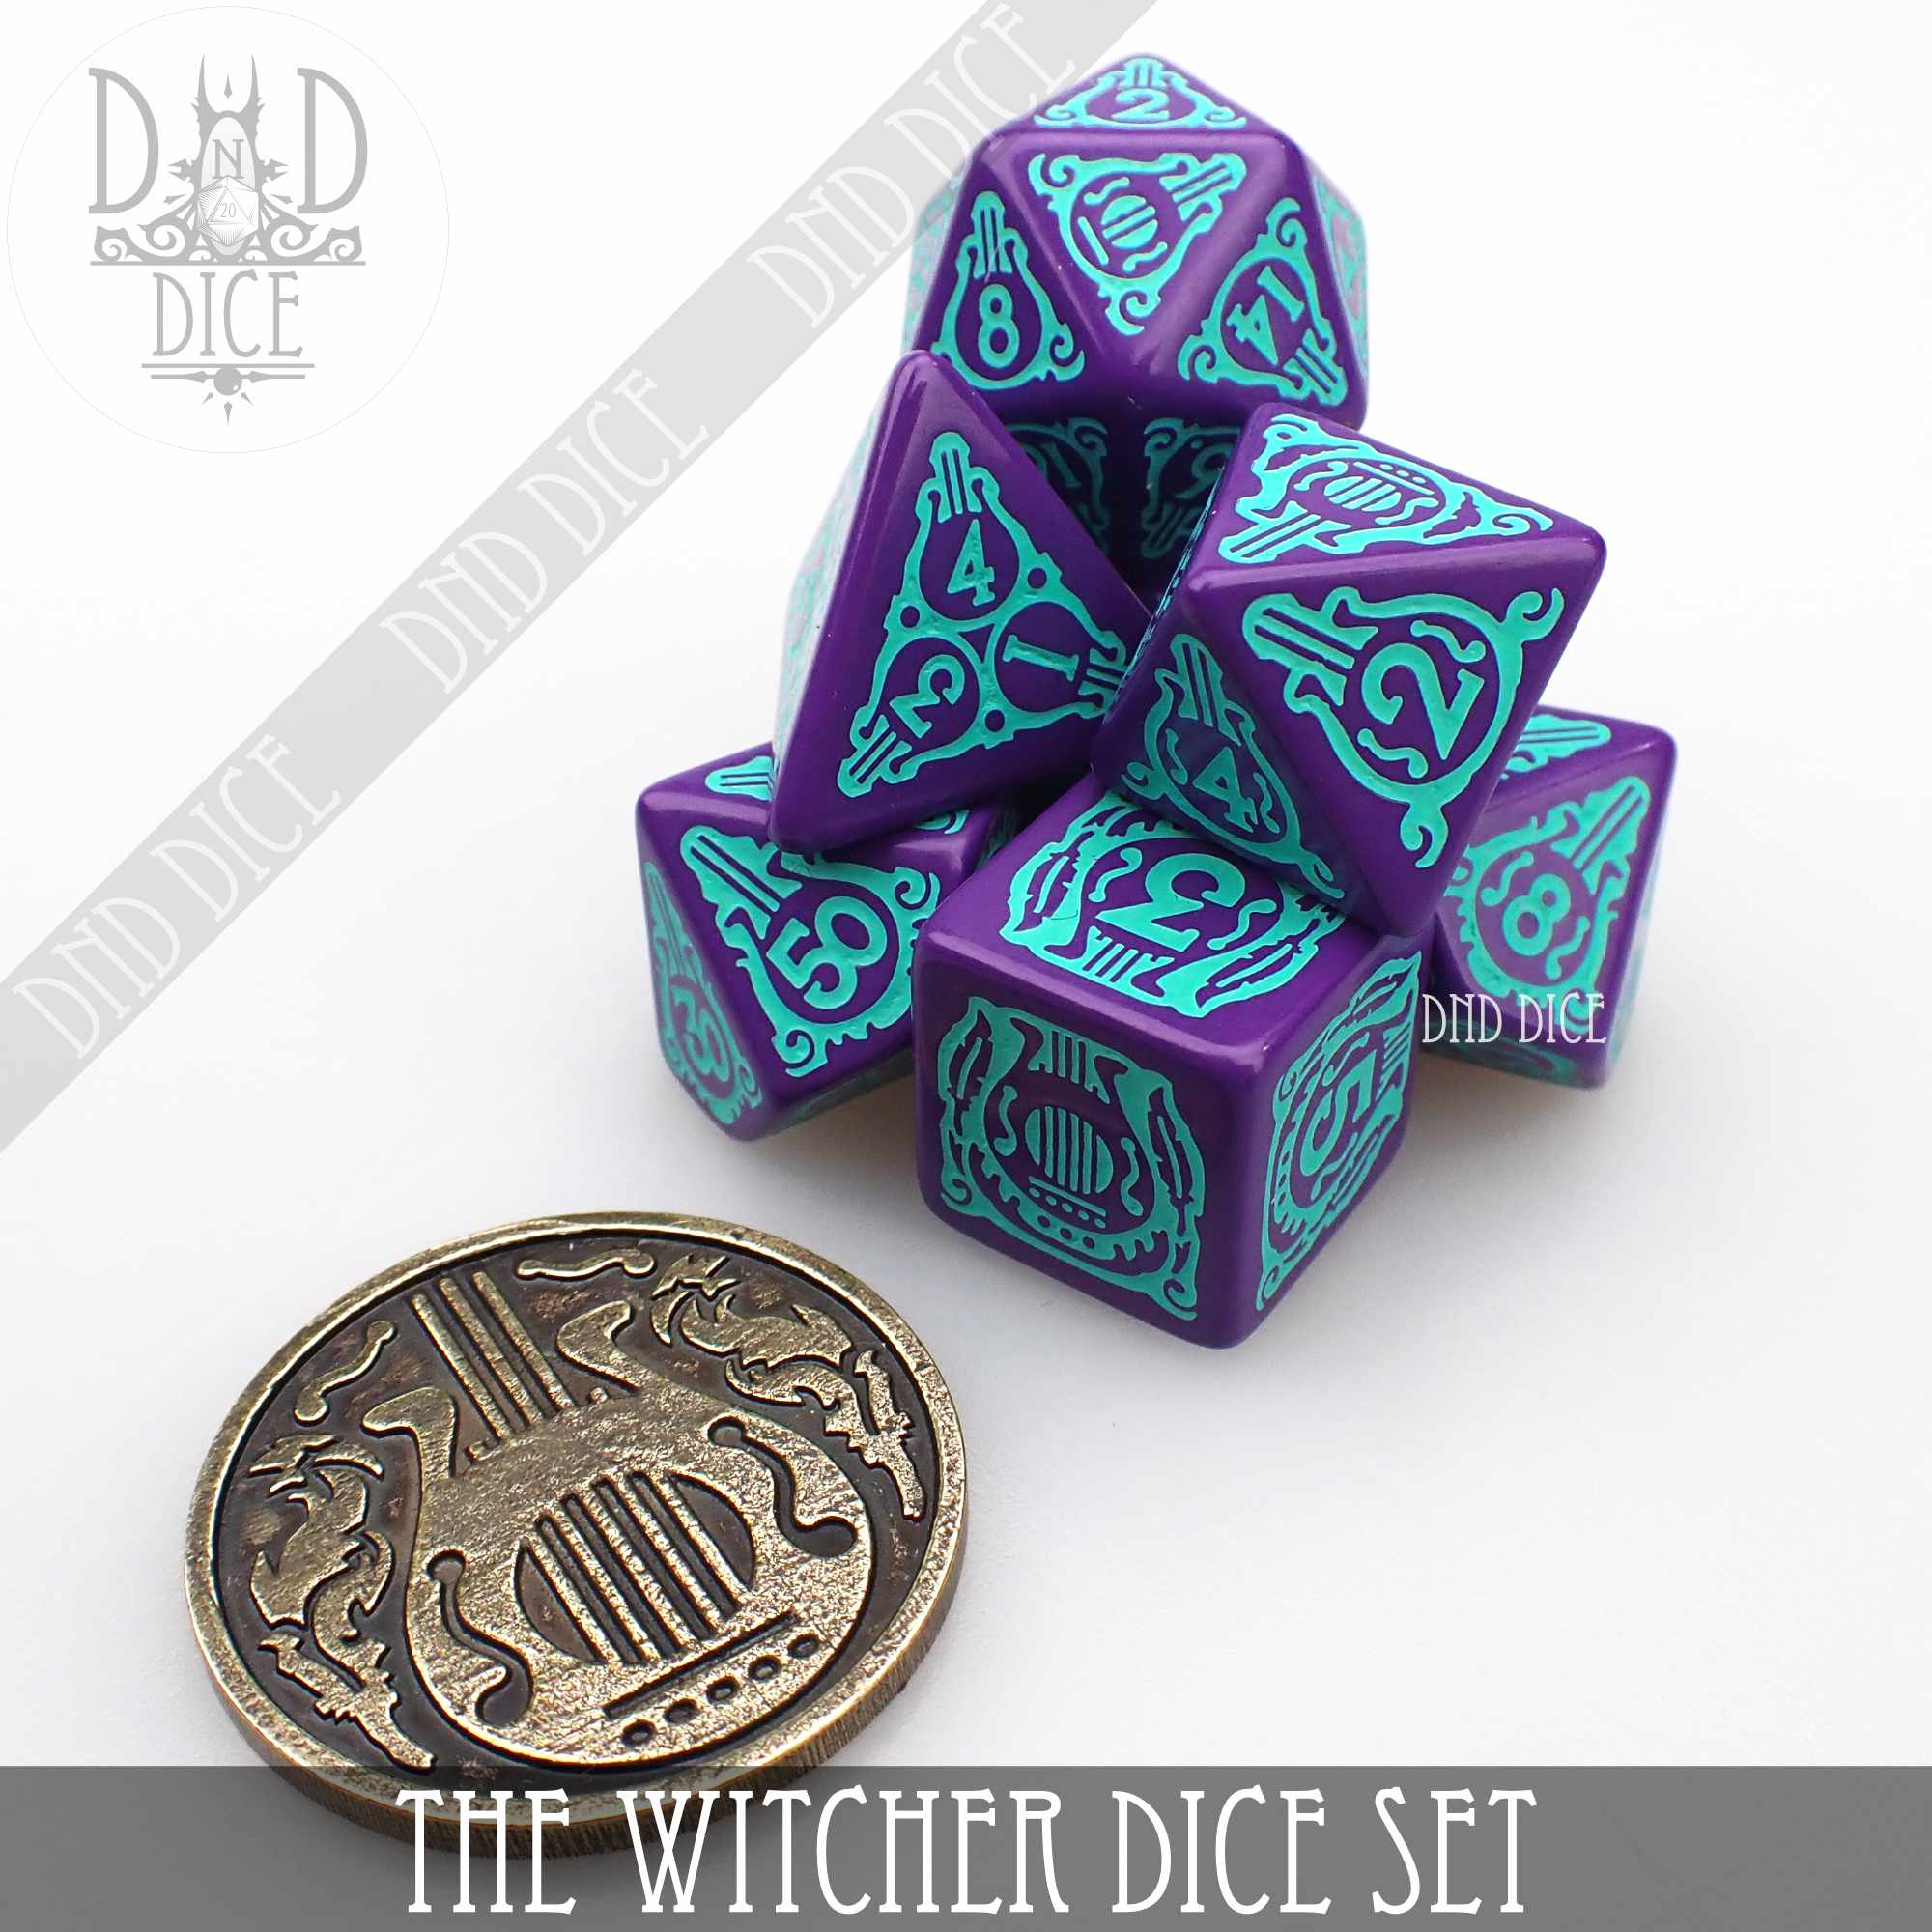 The Witcher Dice Set and Coin - Dandelion / Jaskier